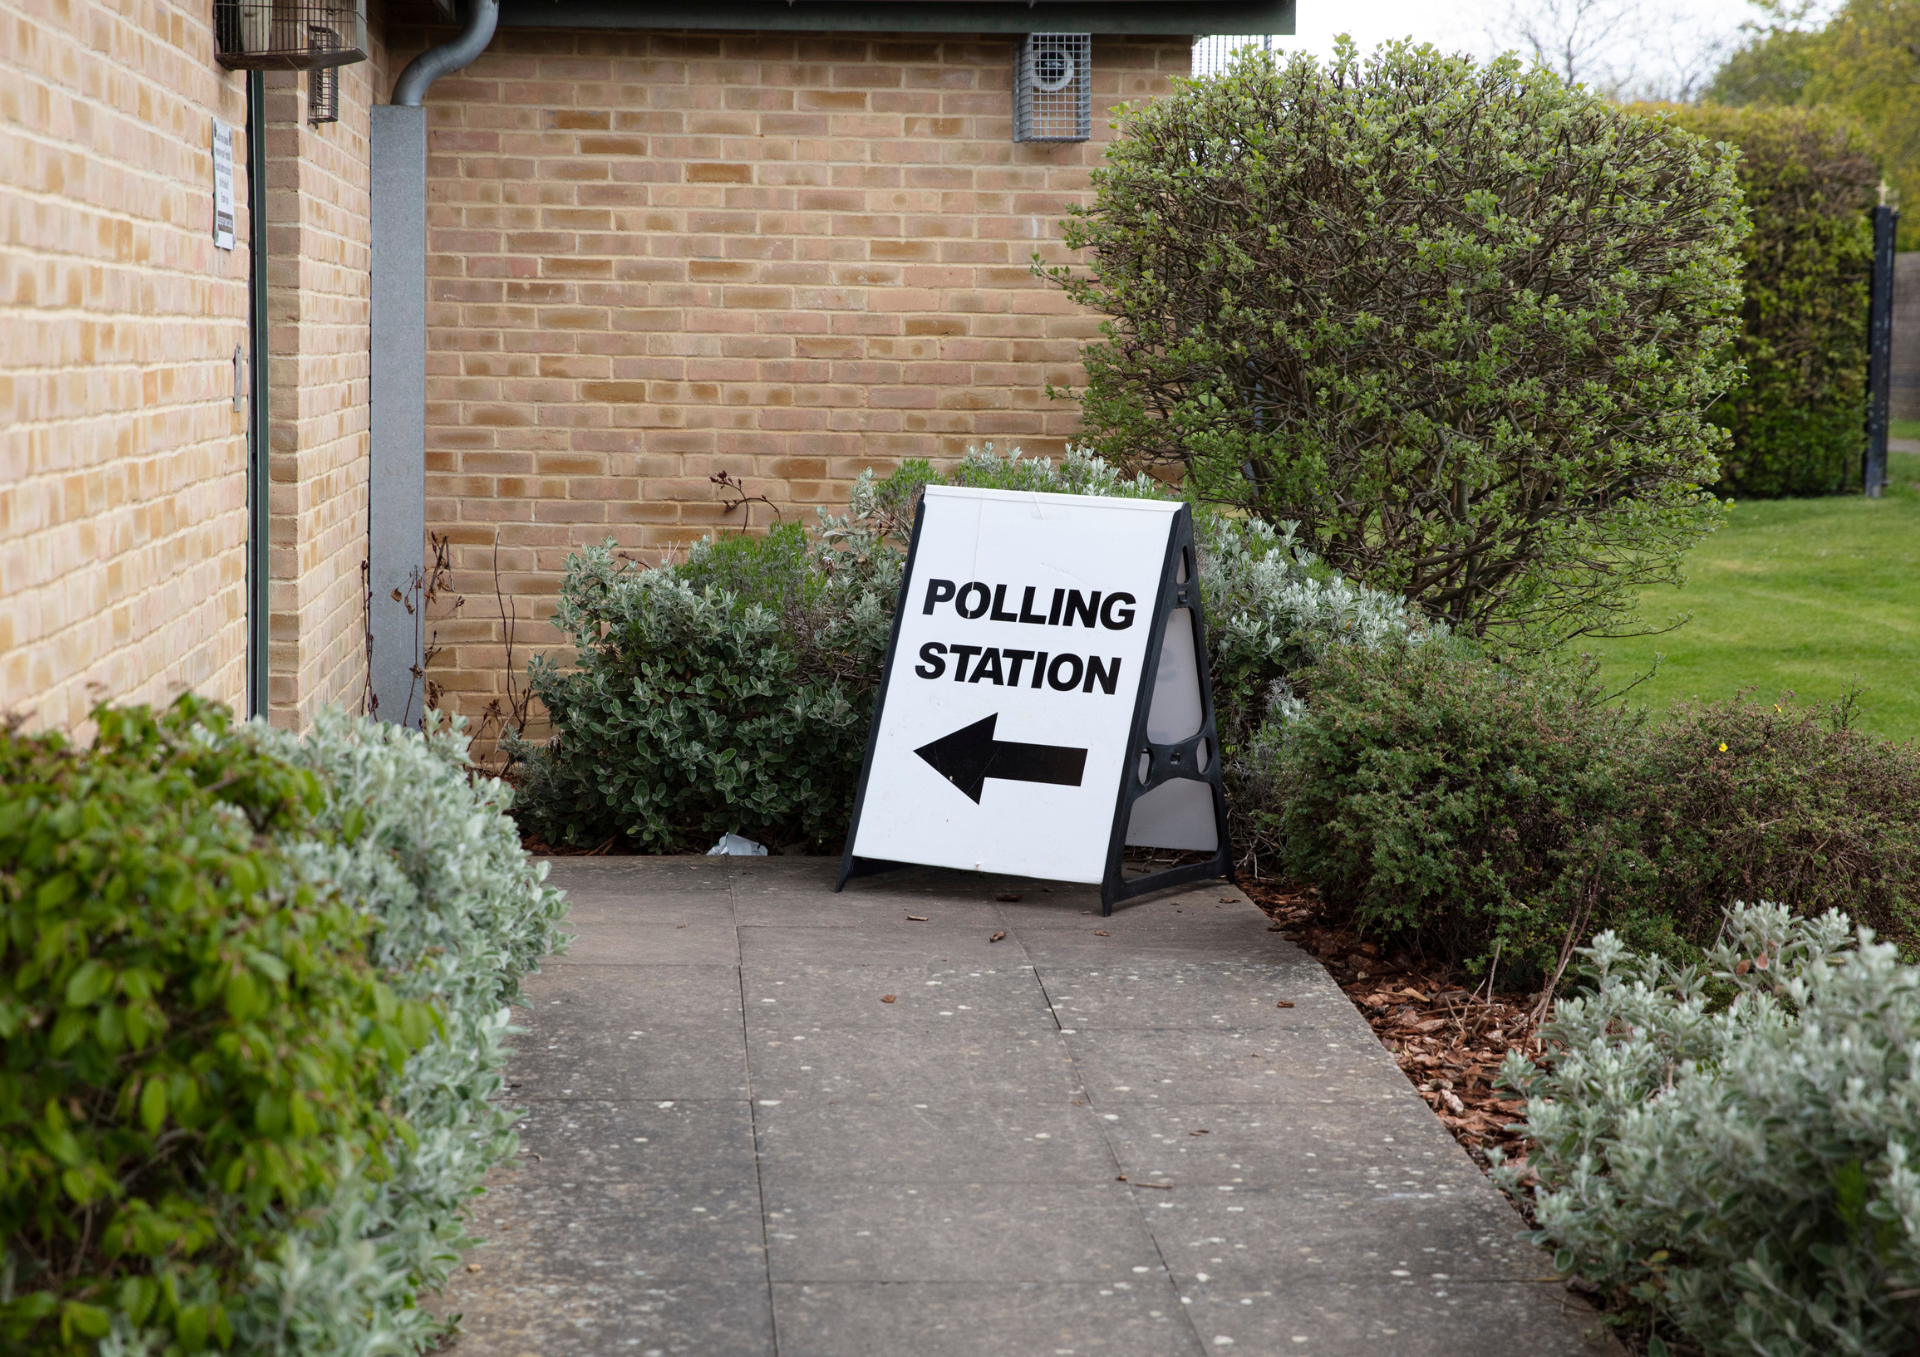 Photo of a sign saying polling station with a direction arrow on the pavement outside the entrance to a building